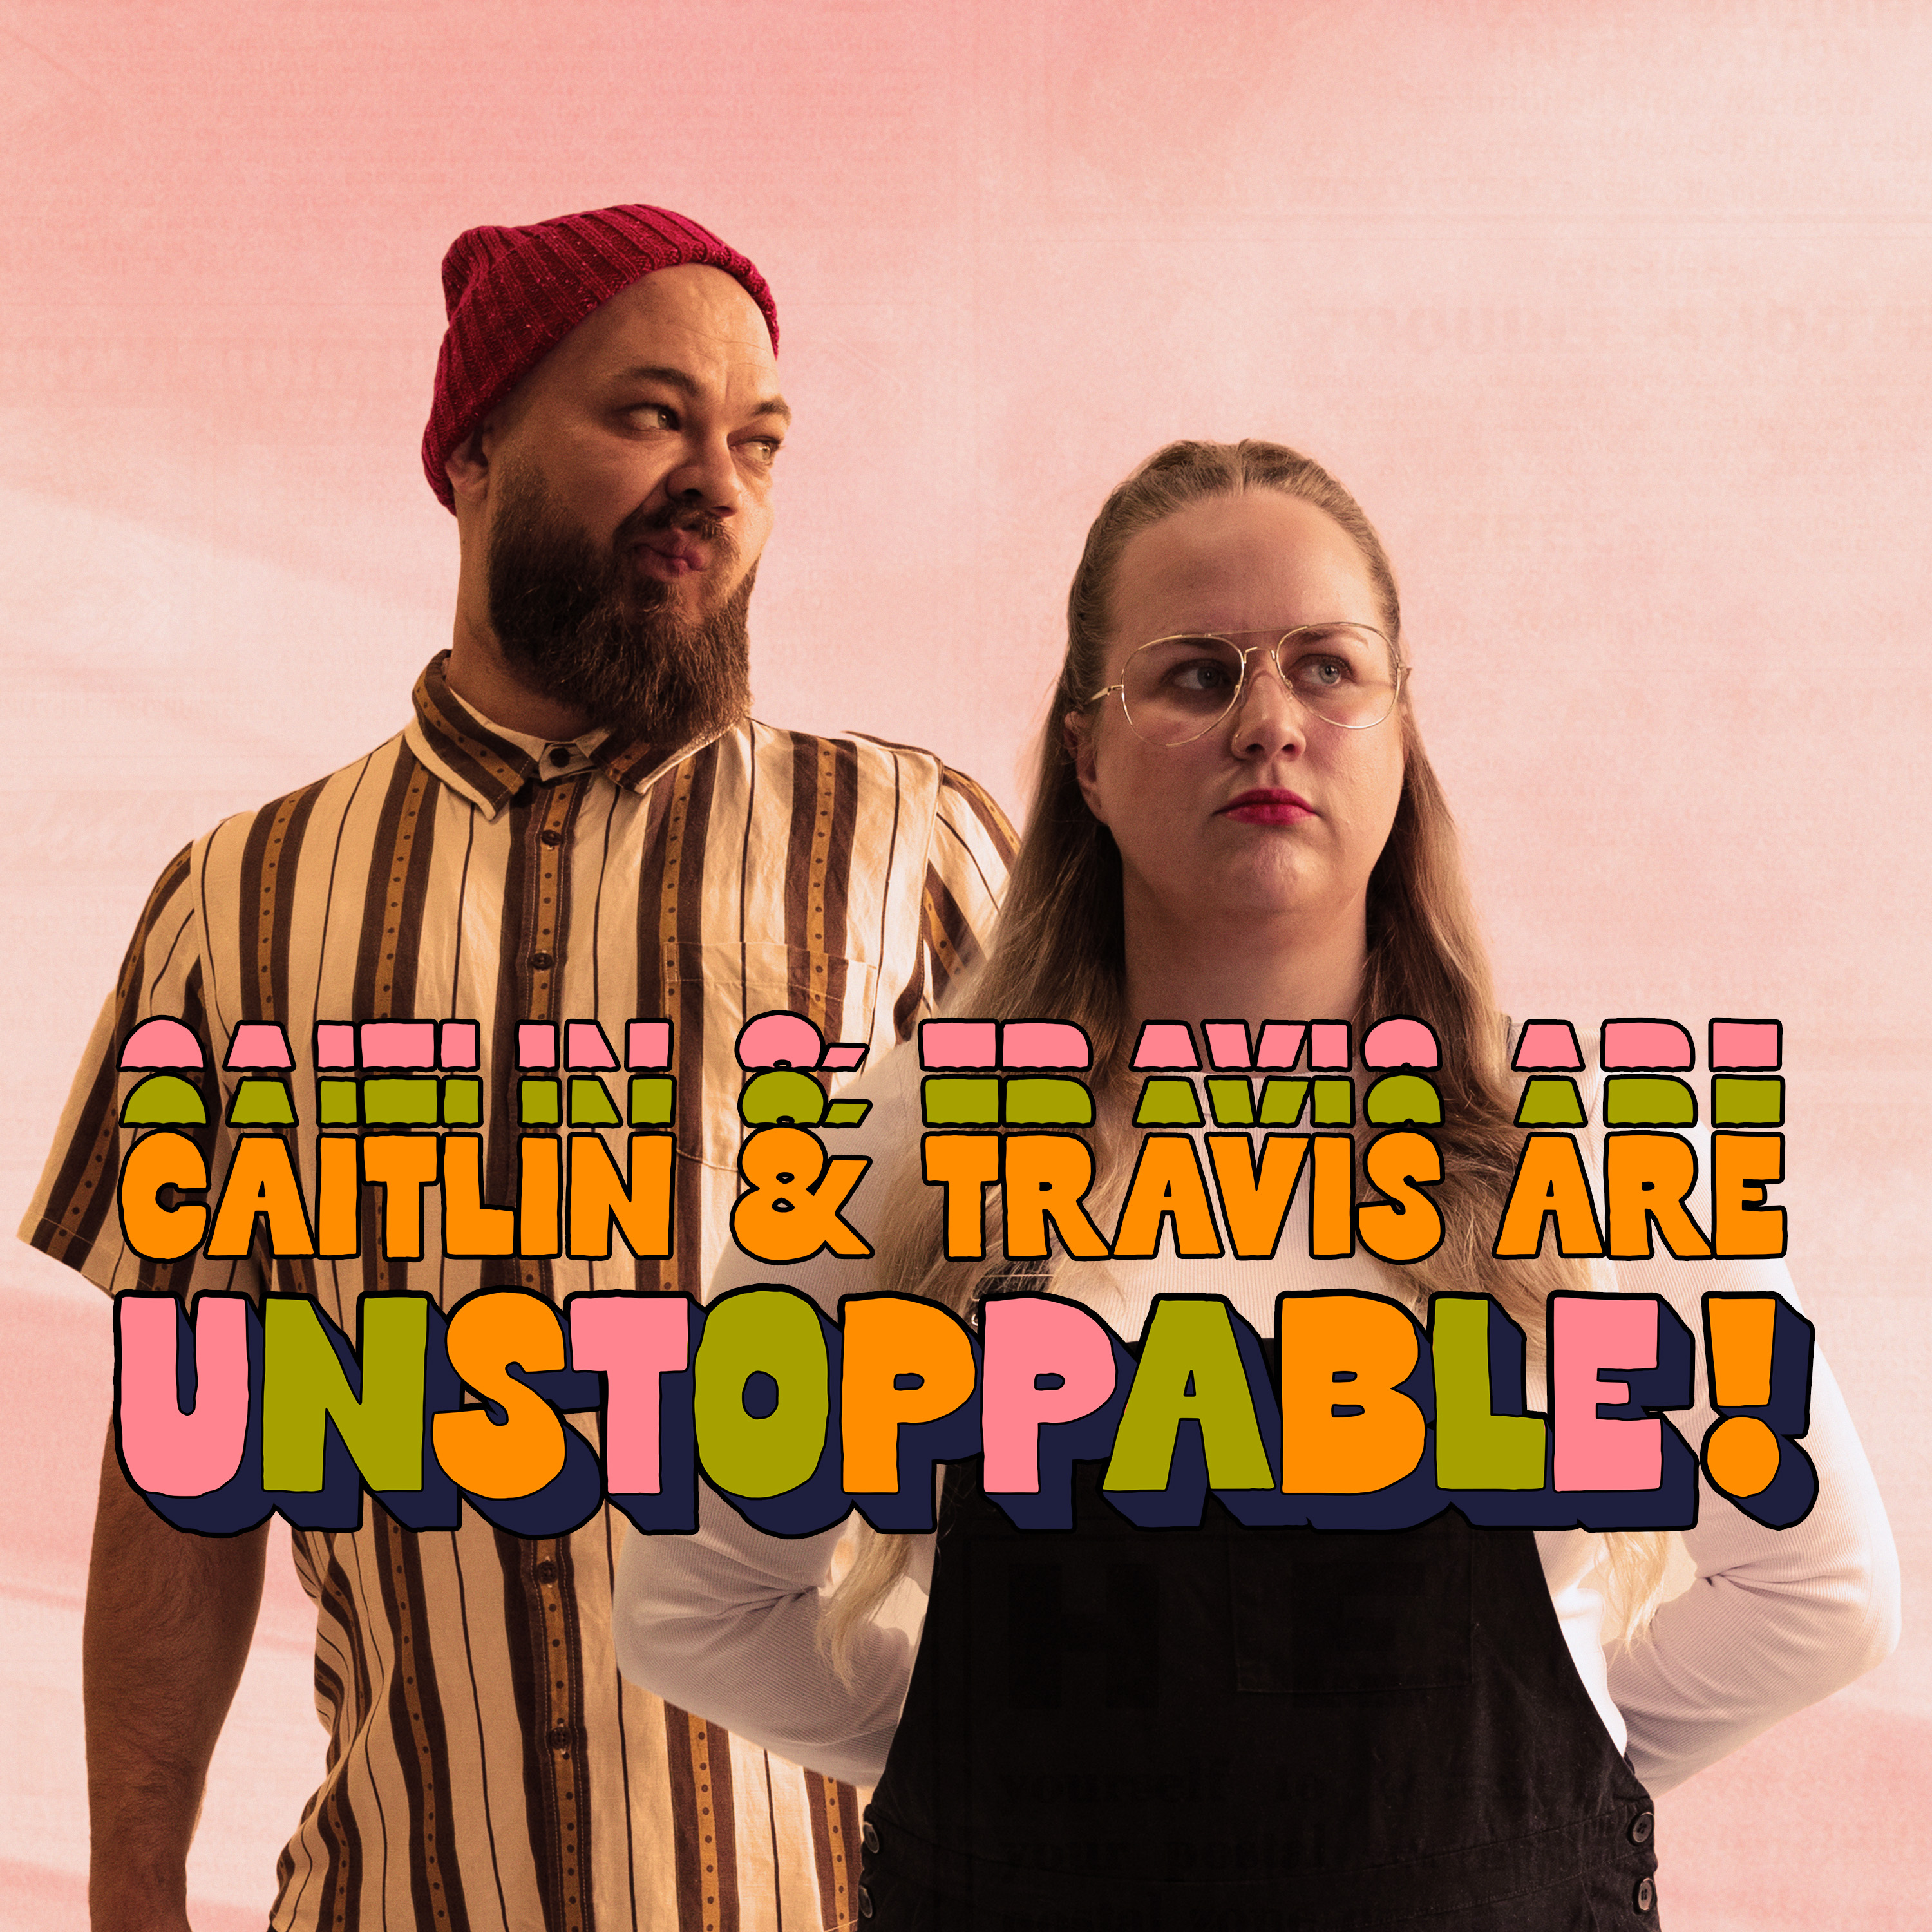 Caitlin & Travis are Undesirable